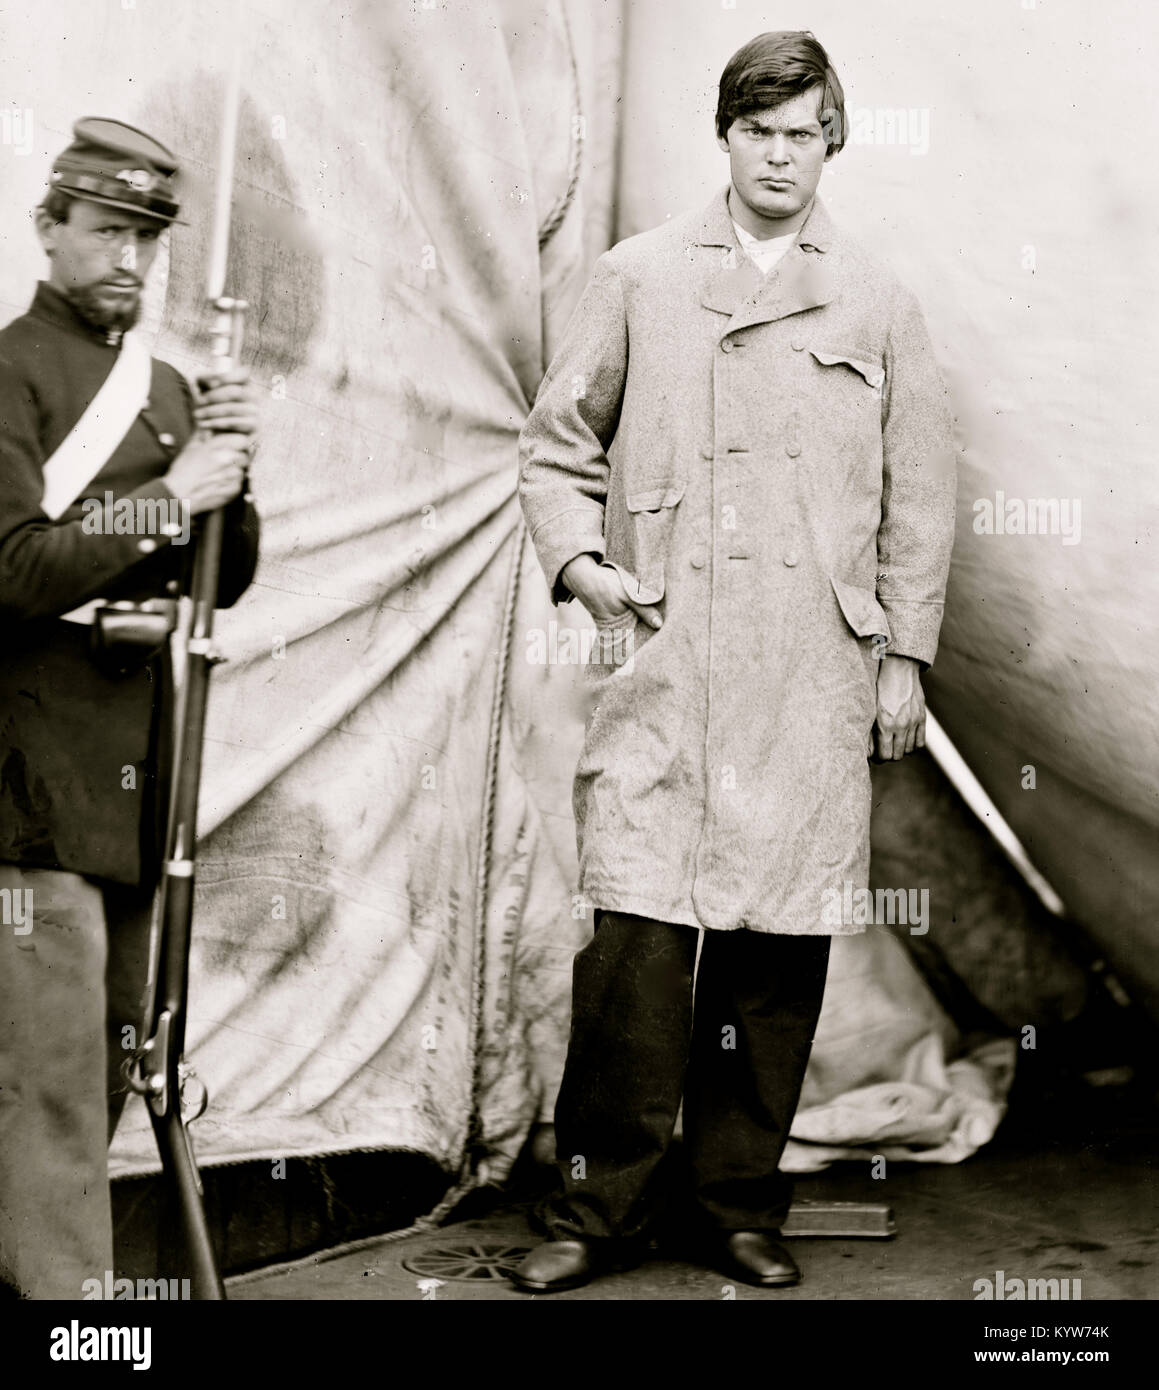 Washington Navy Yard, District of Columbia. Lewis Payne, standing in overcoat and without hat. Federal guard standing on left Stock Photo